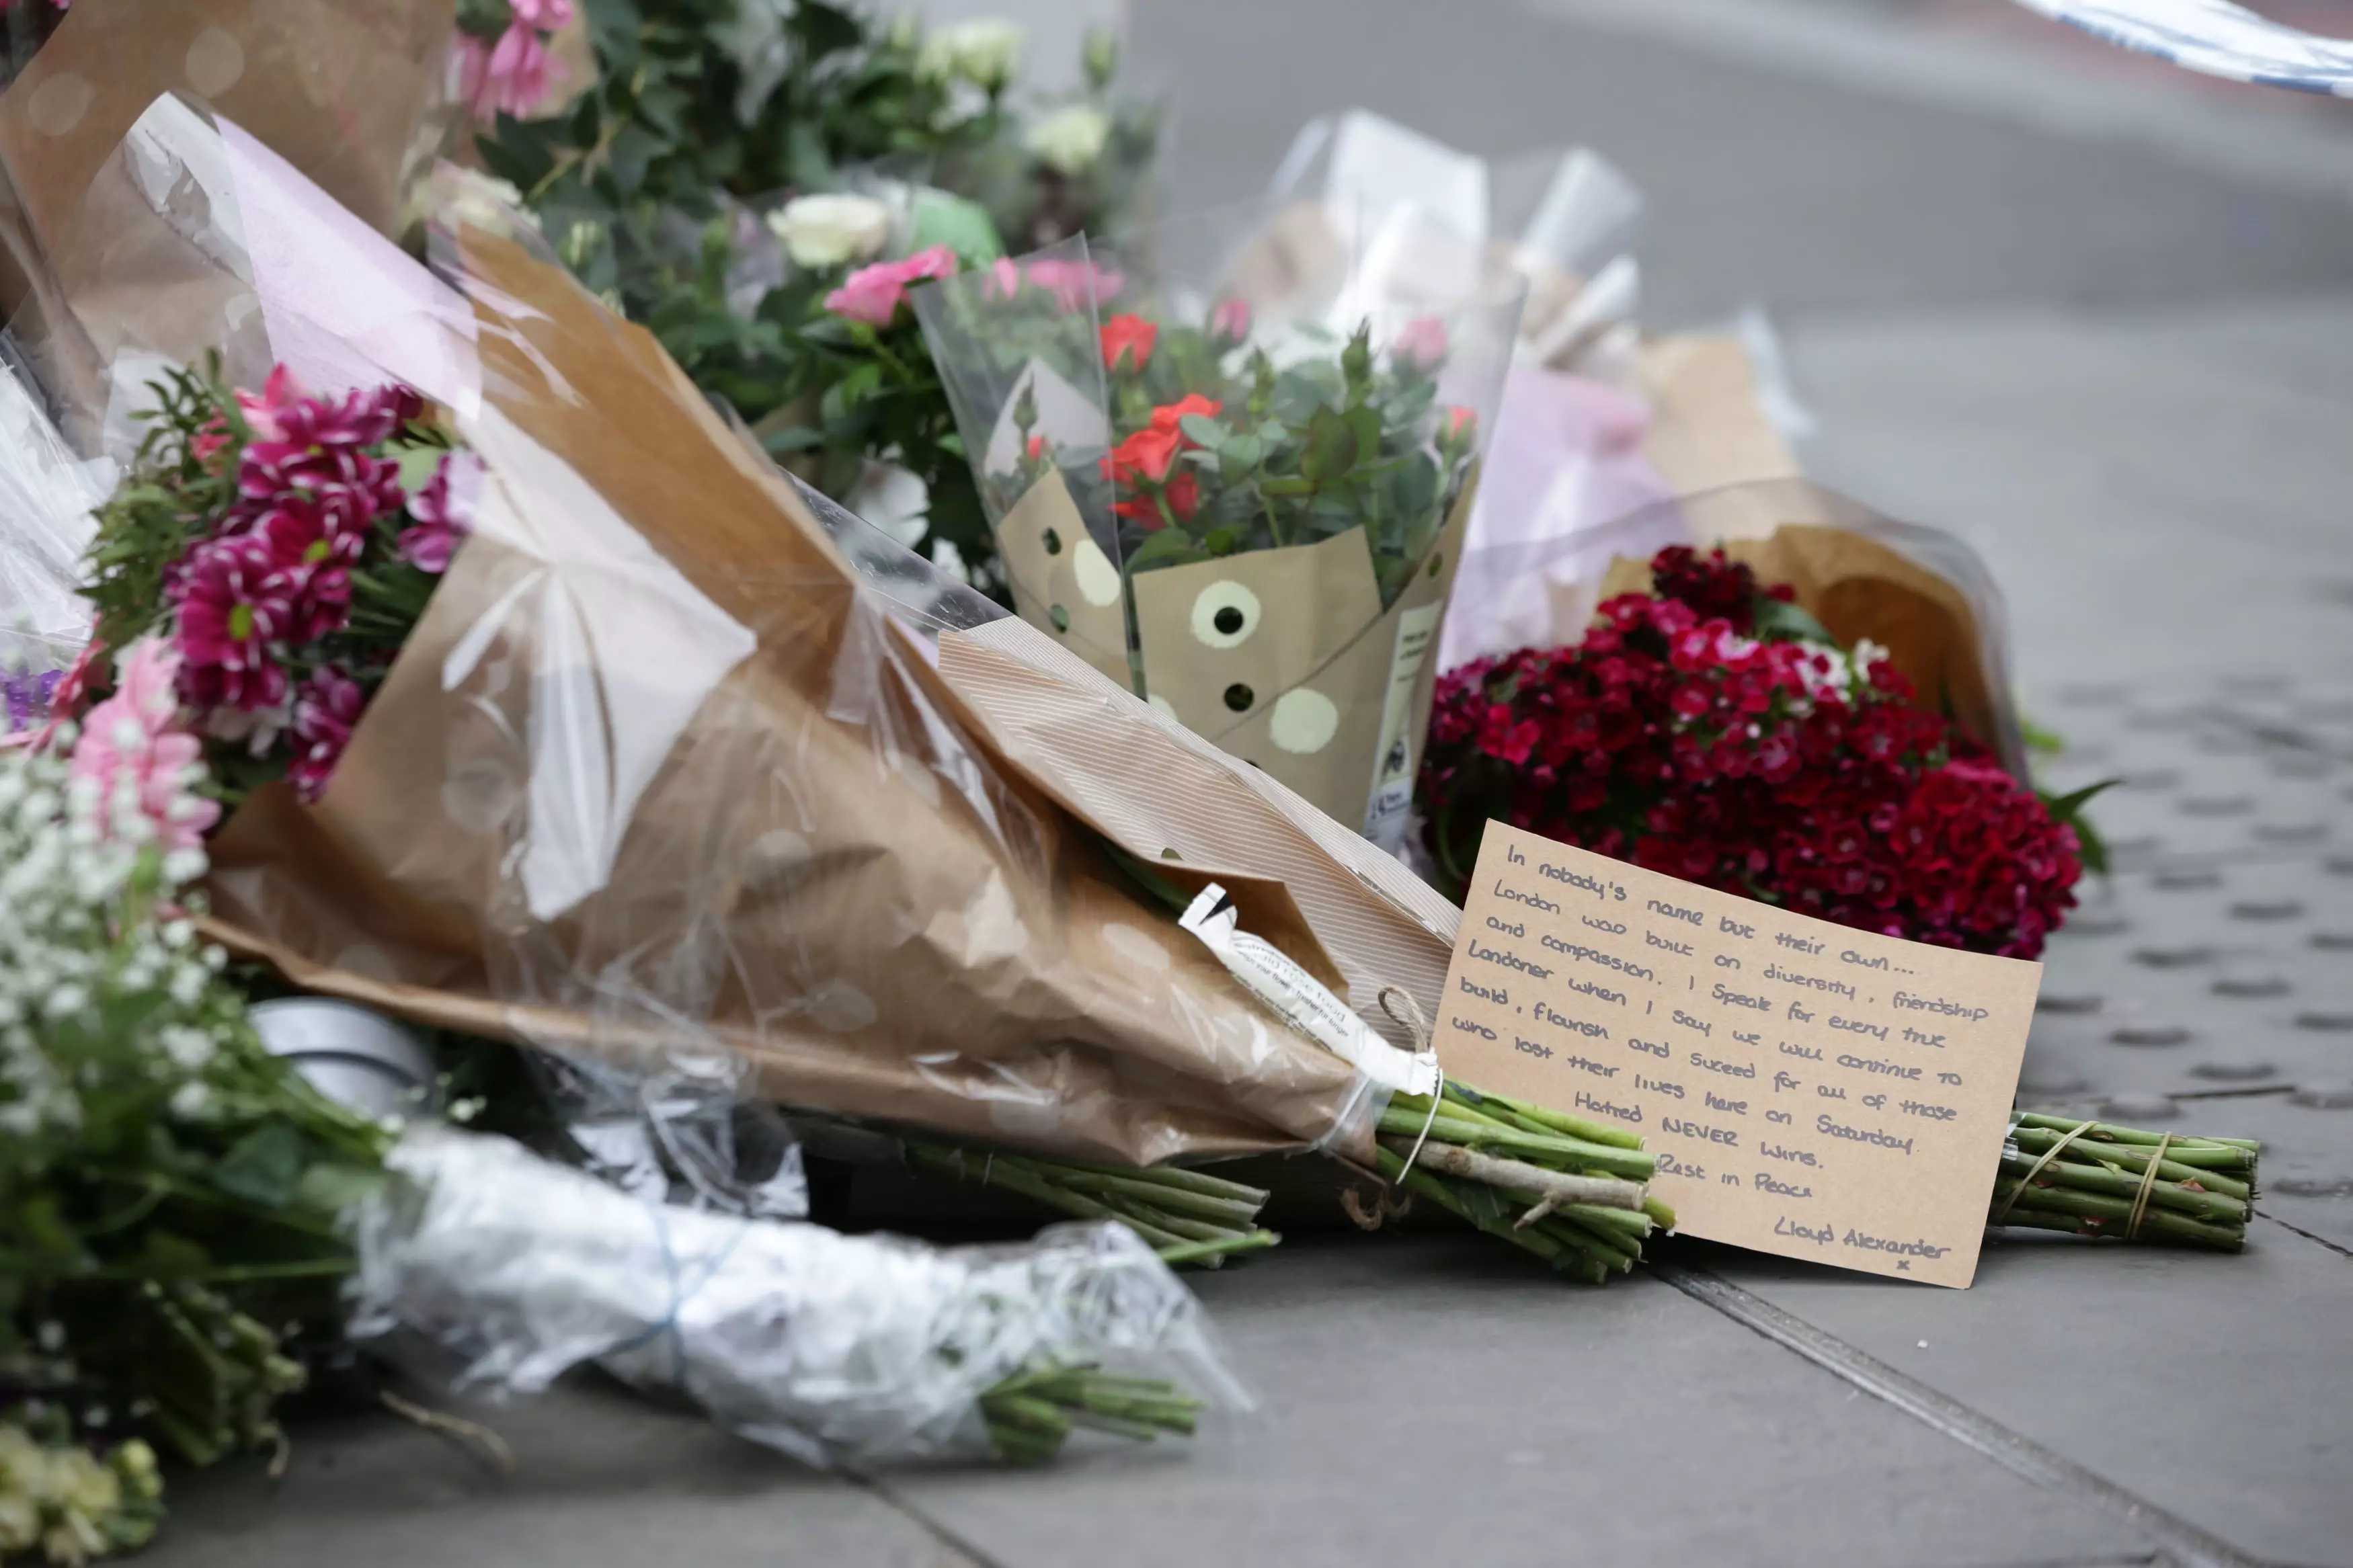 Flowers laid for the victims of London terror attack